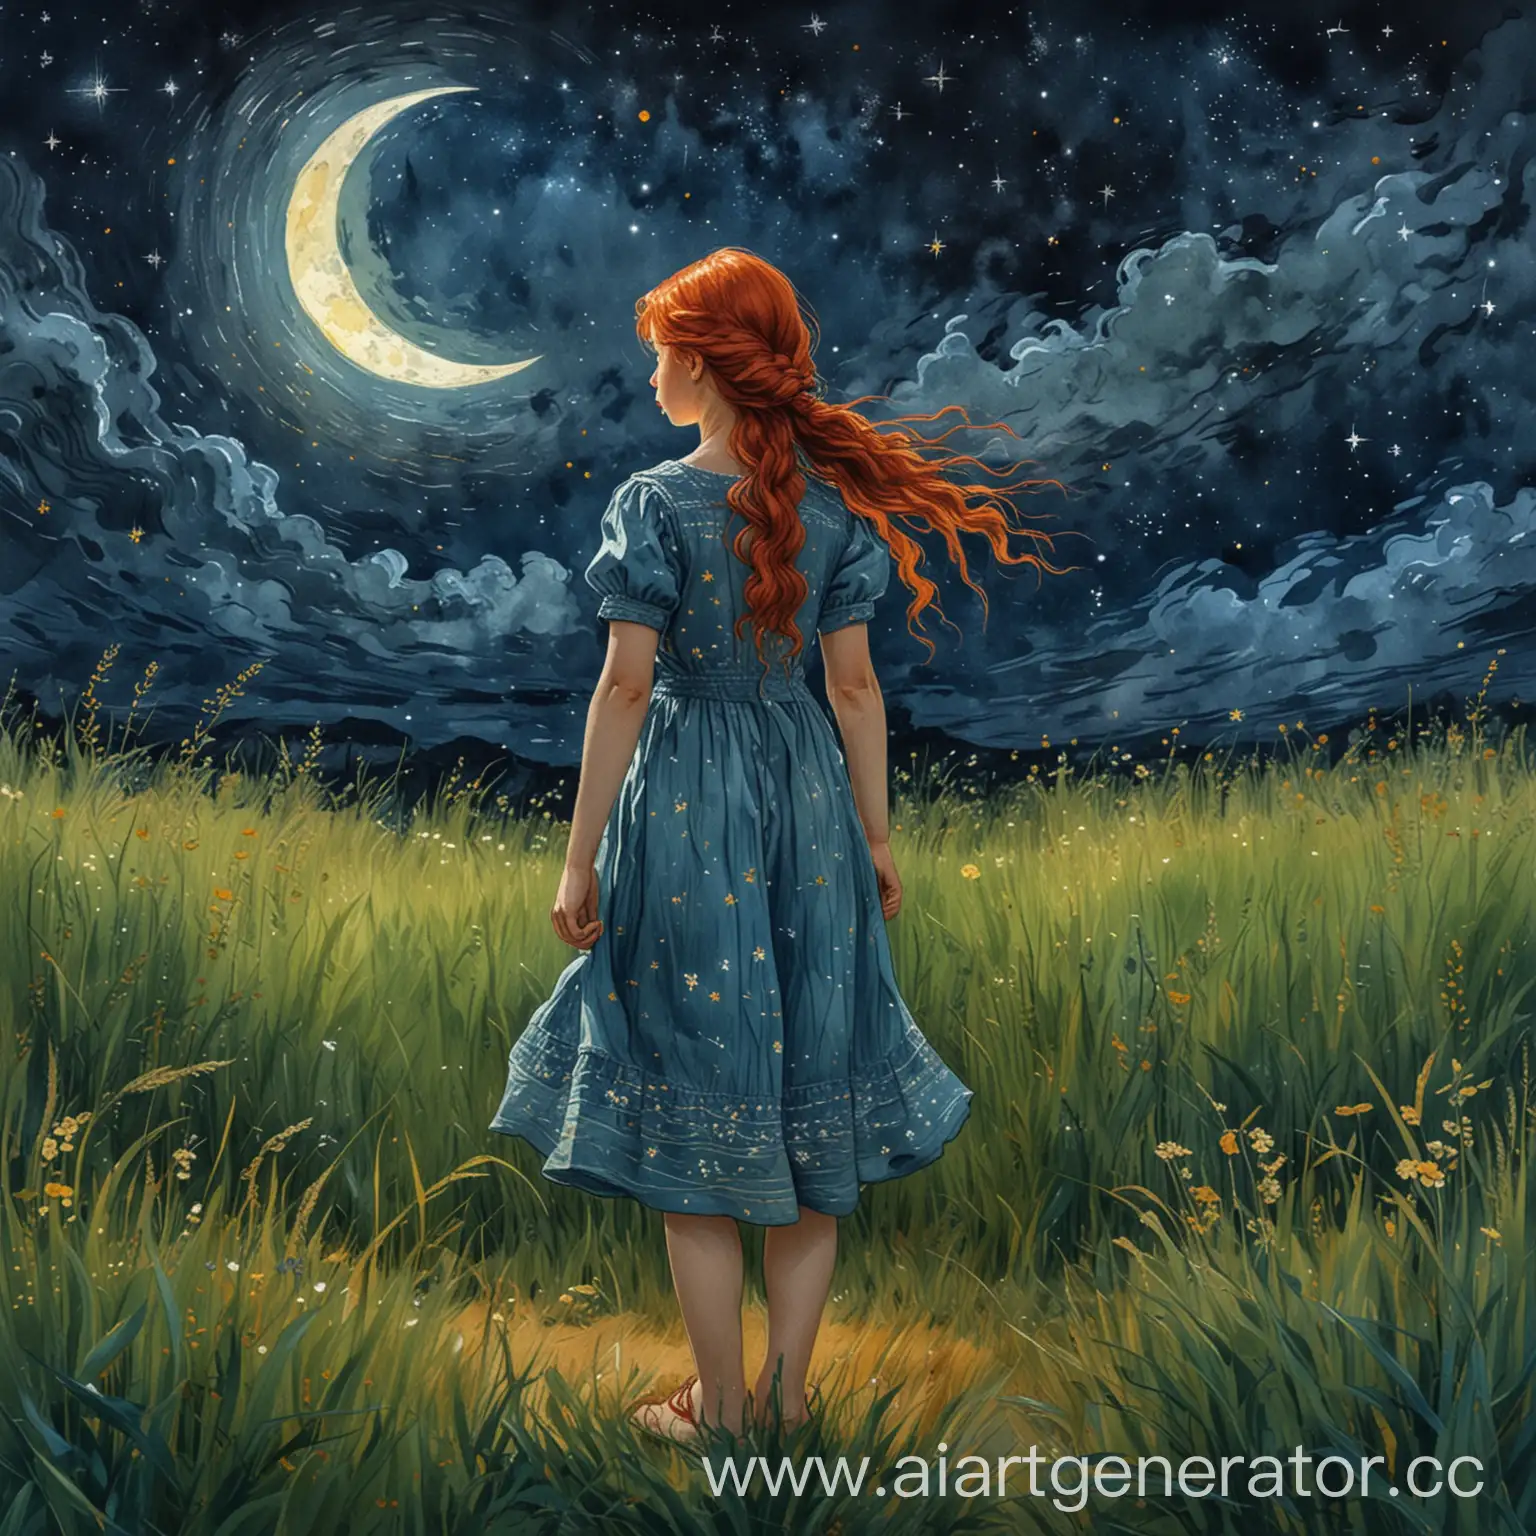 Night-Sky-Portrait-of-a-Girl-in-Watercolor-Style-by-Vincent-Van-Gogh